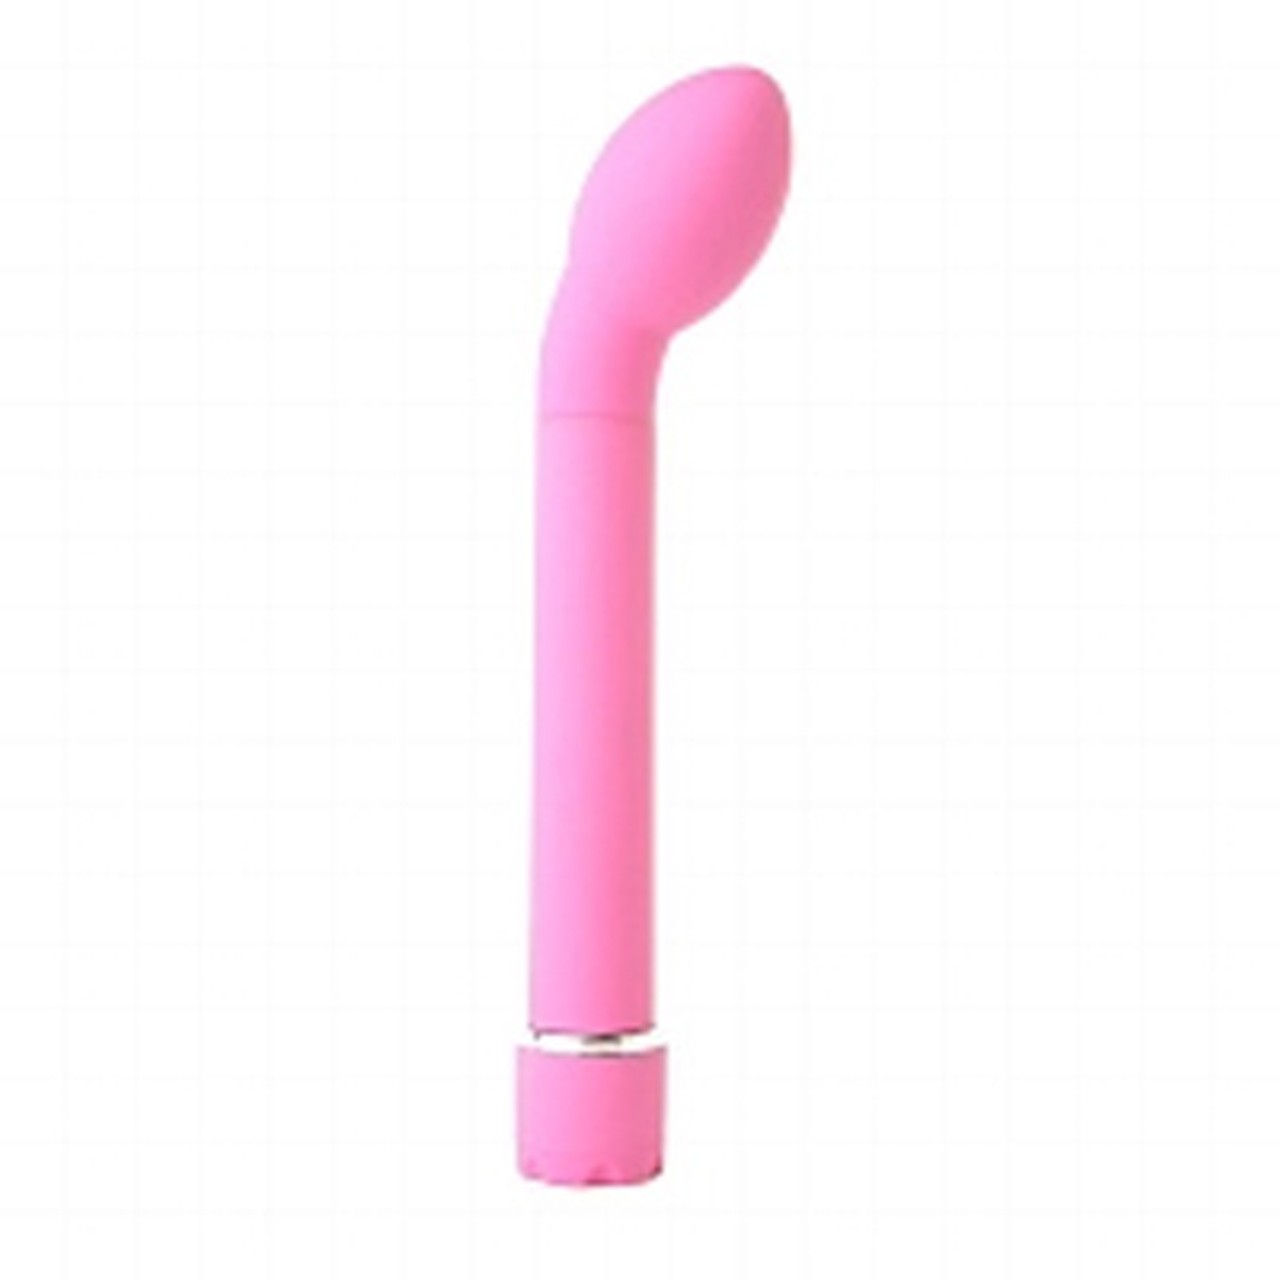 G-SPOT STIMULATOR BY INTIMATE ORGASMS ..........
This little doohickey is designed to make sex more pleasurable for her. (Feeling bad yet, guy?) Includes orgasm gel and g-spot finger vibrator to keep her tickled every night!